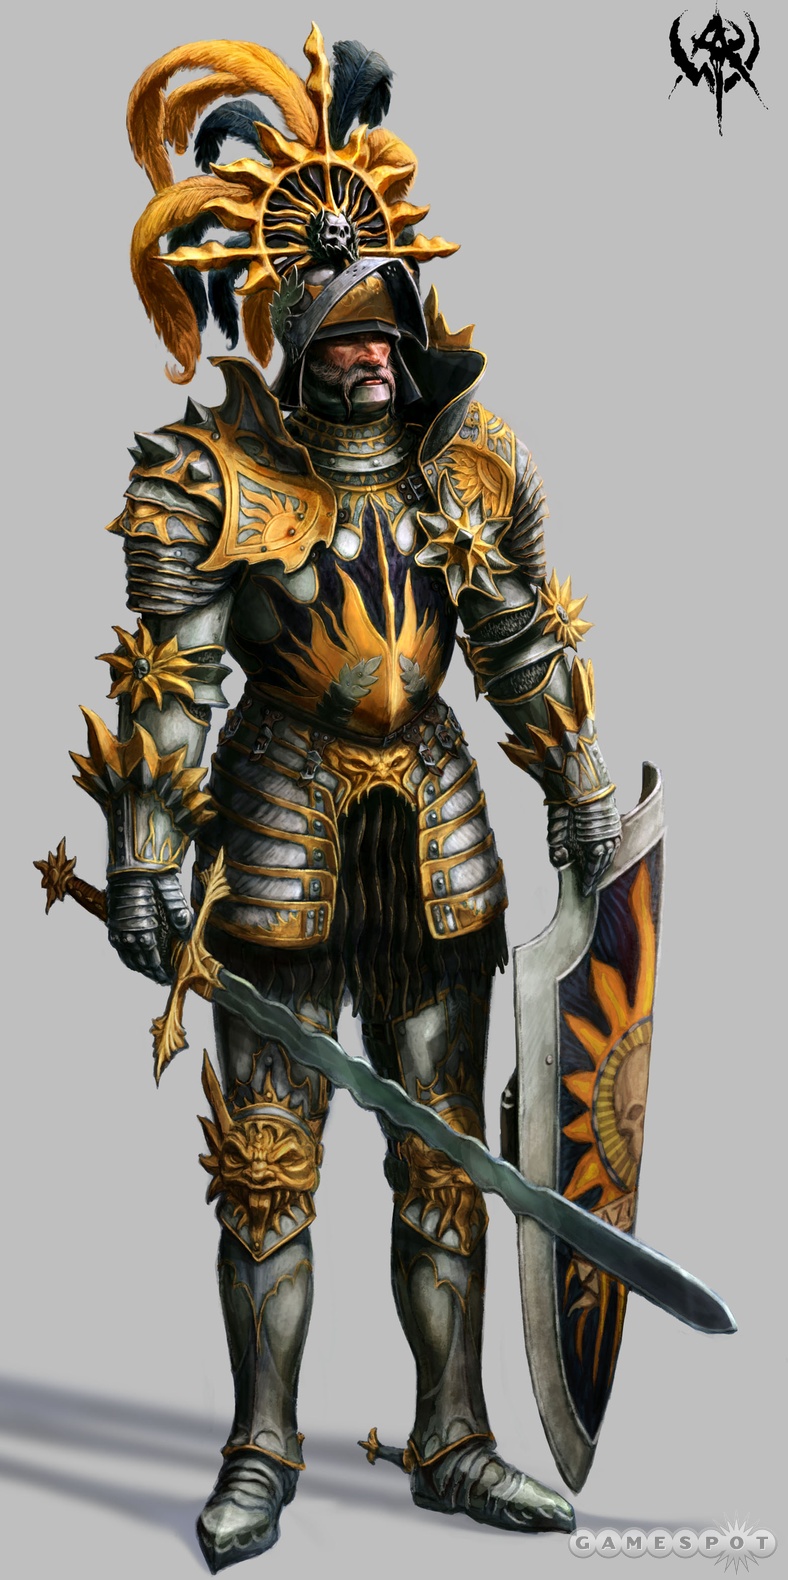 The knight of the blazing sun protects his comrades in battle and gets to wear really cool helmets, too.